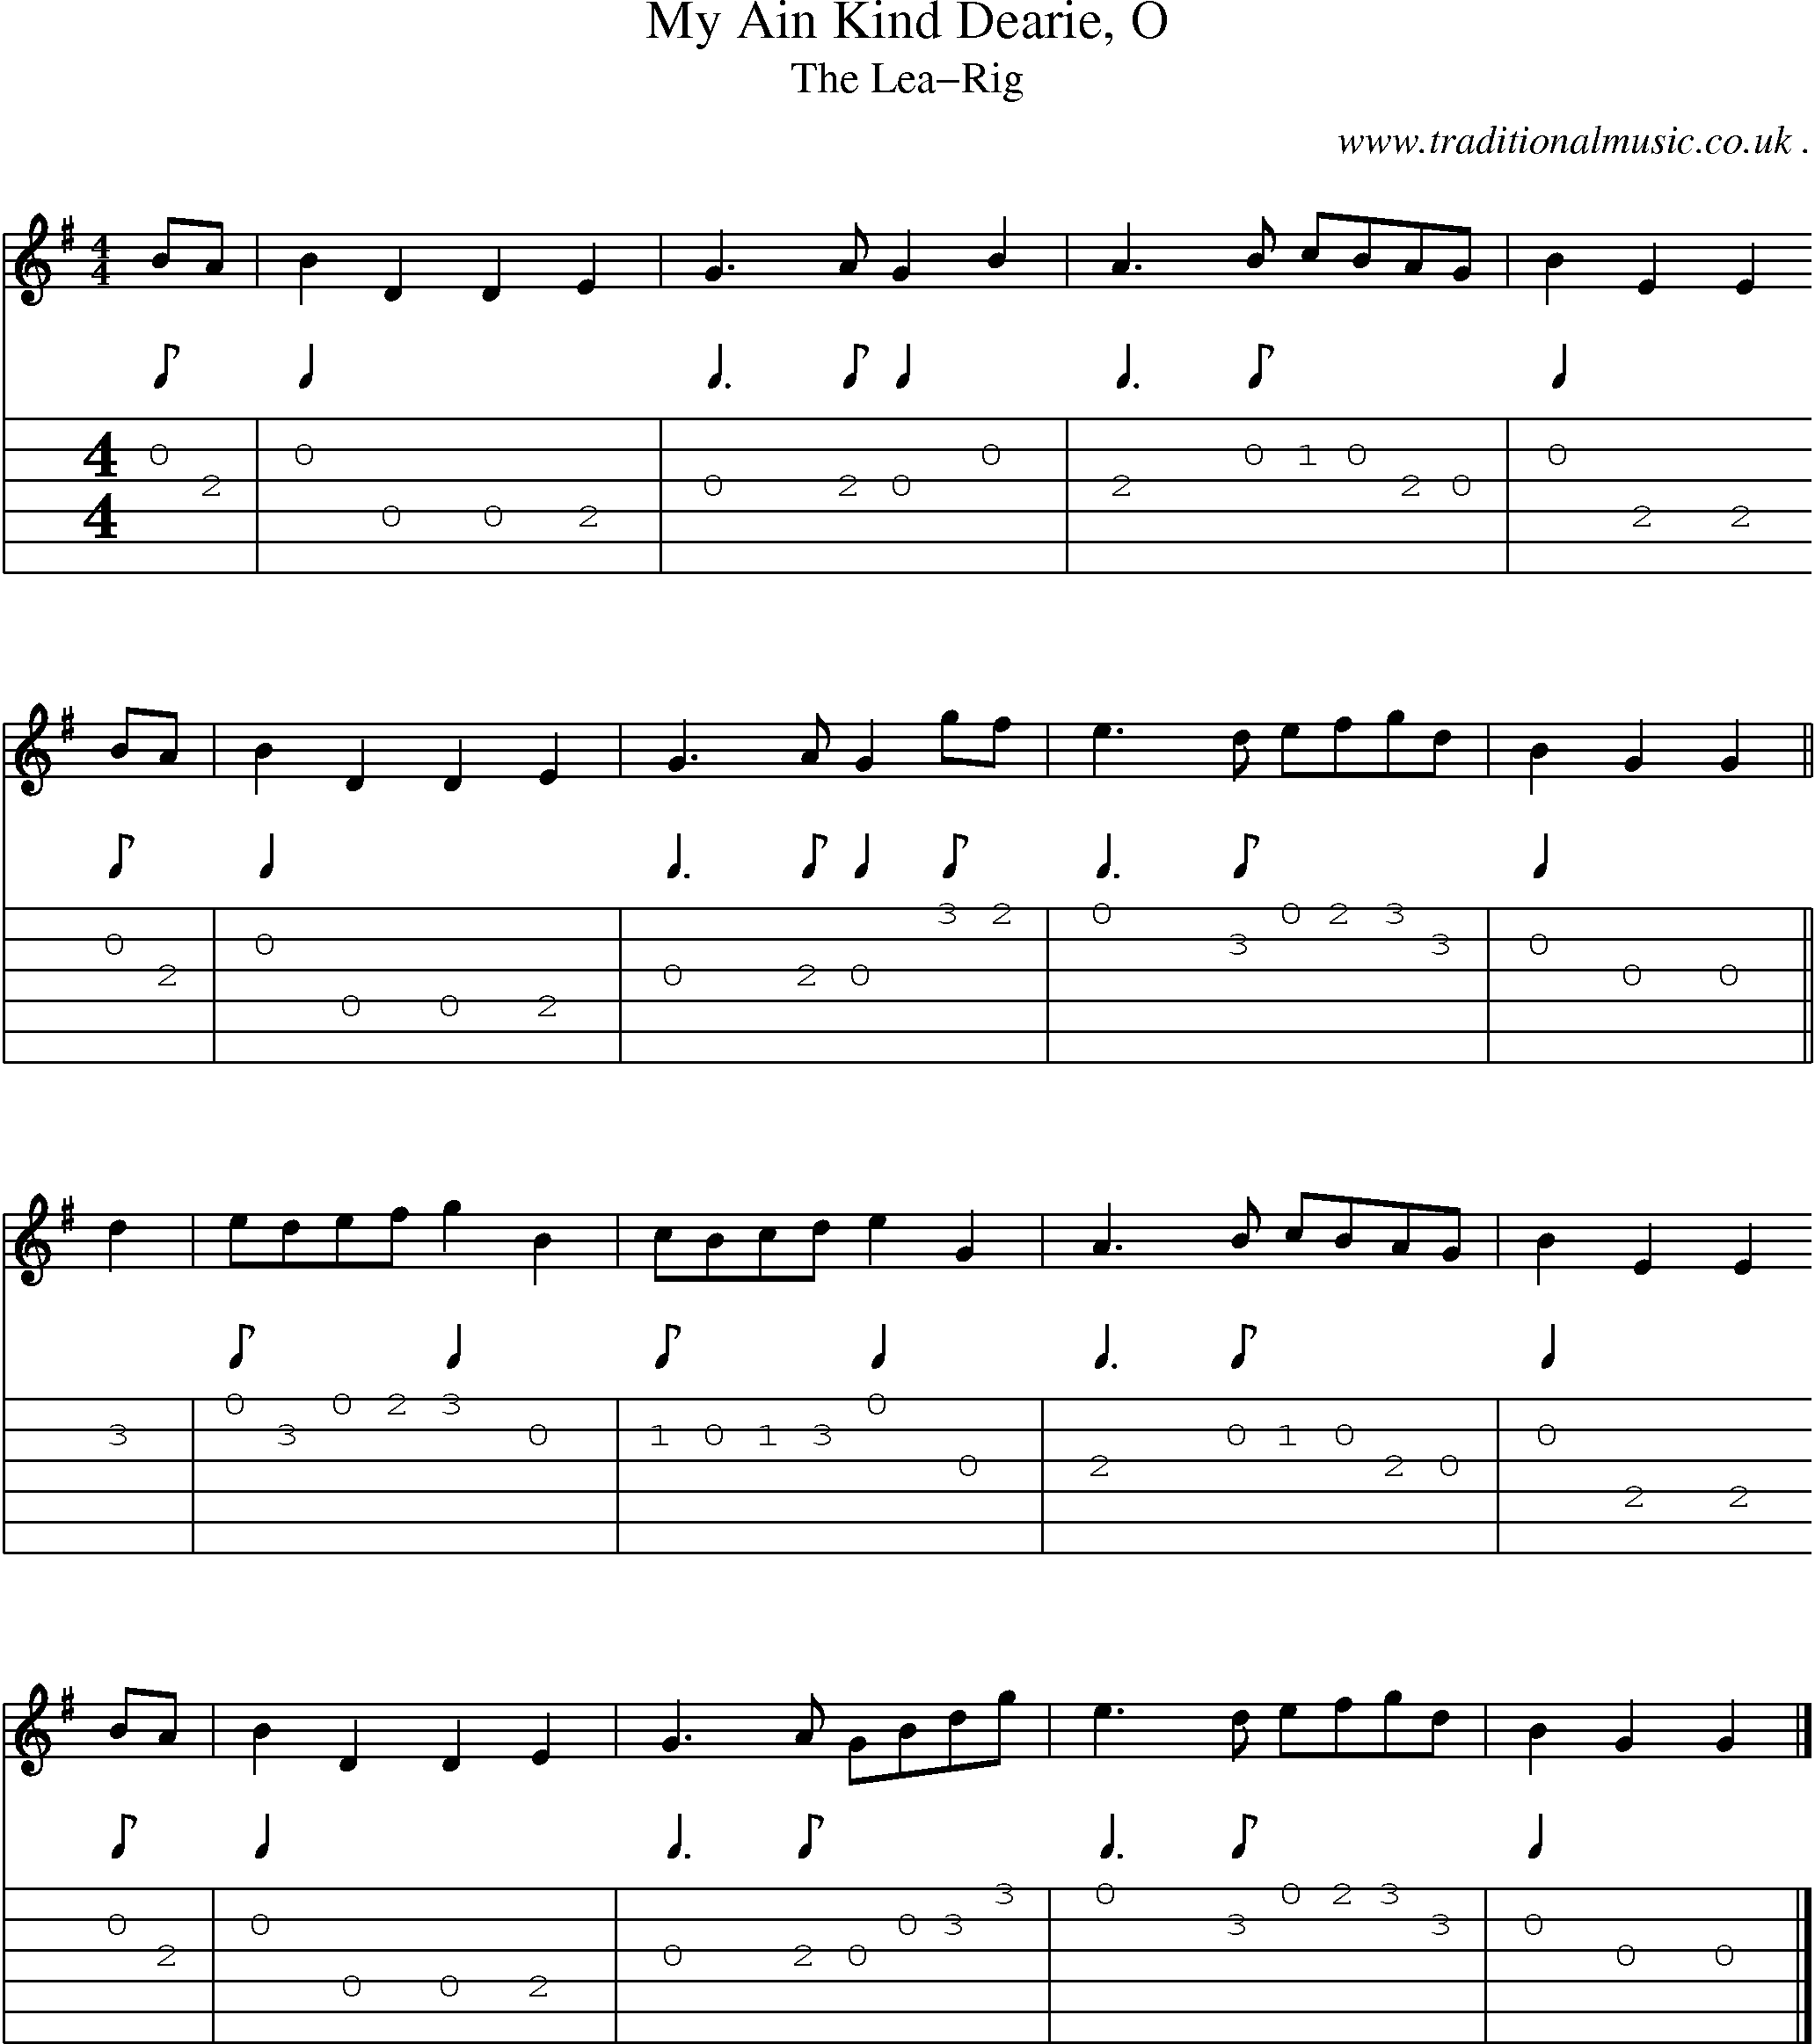 Sheet-music  score, Chords and Guitar Tabs for My Ain Kind Dearie O